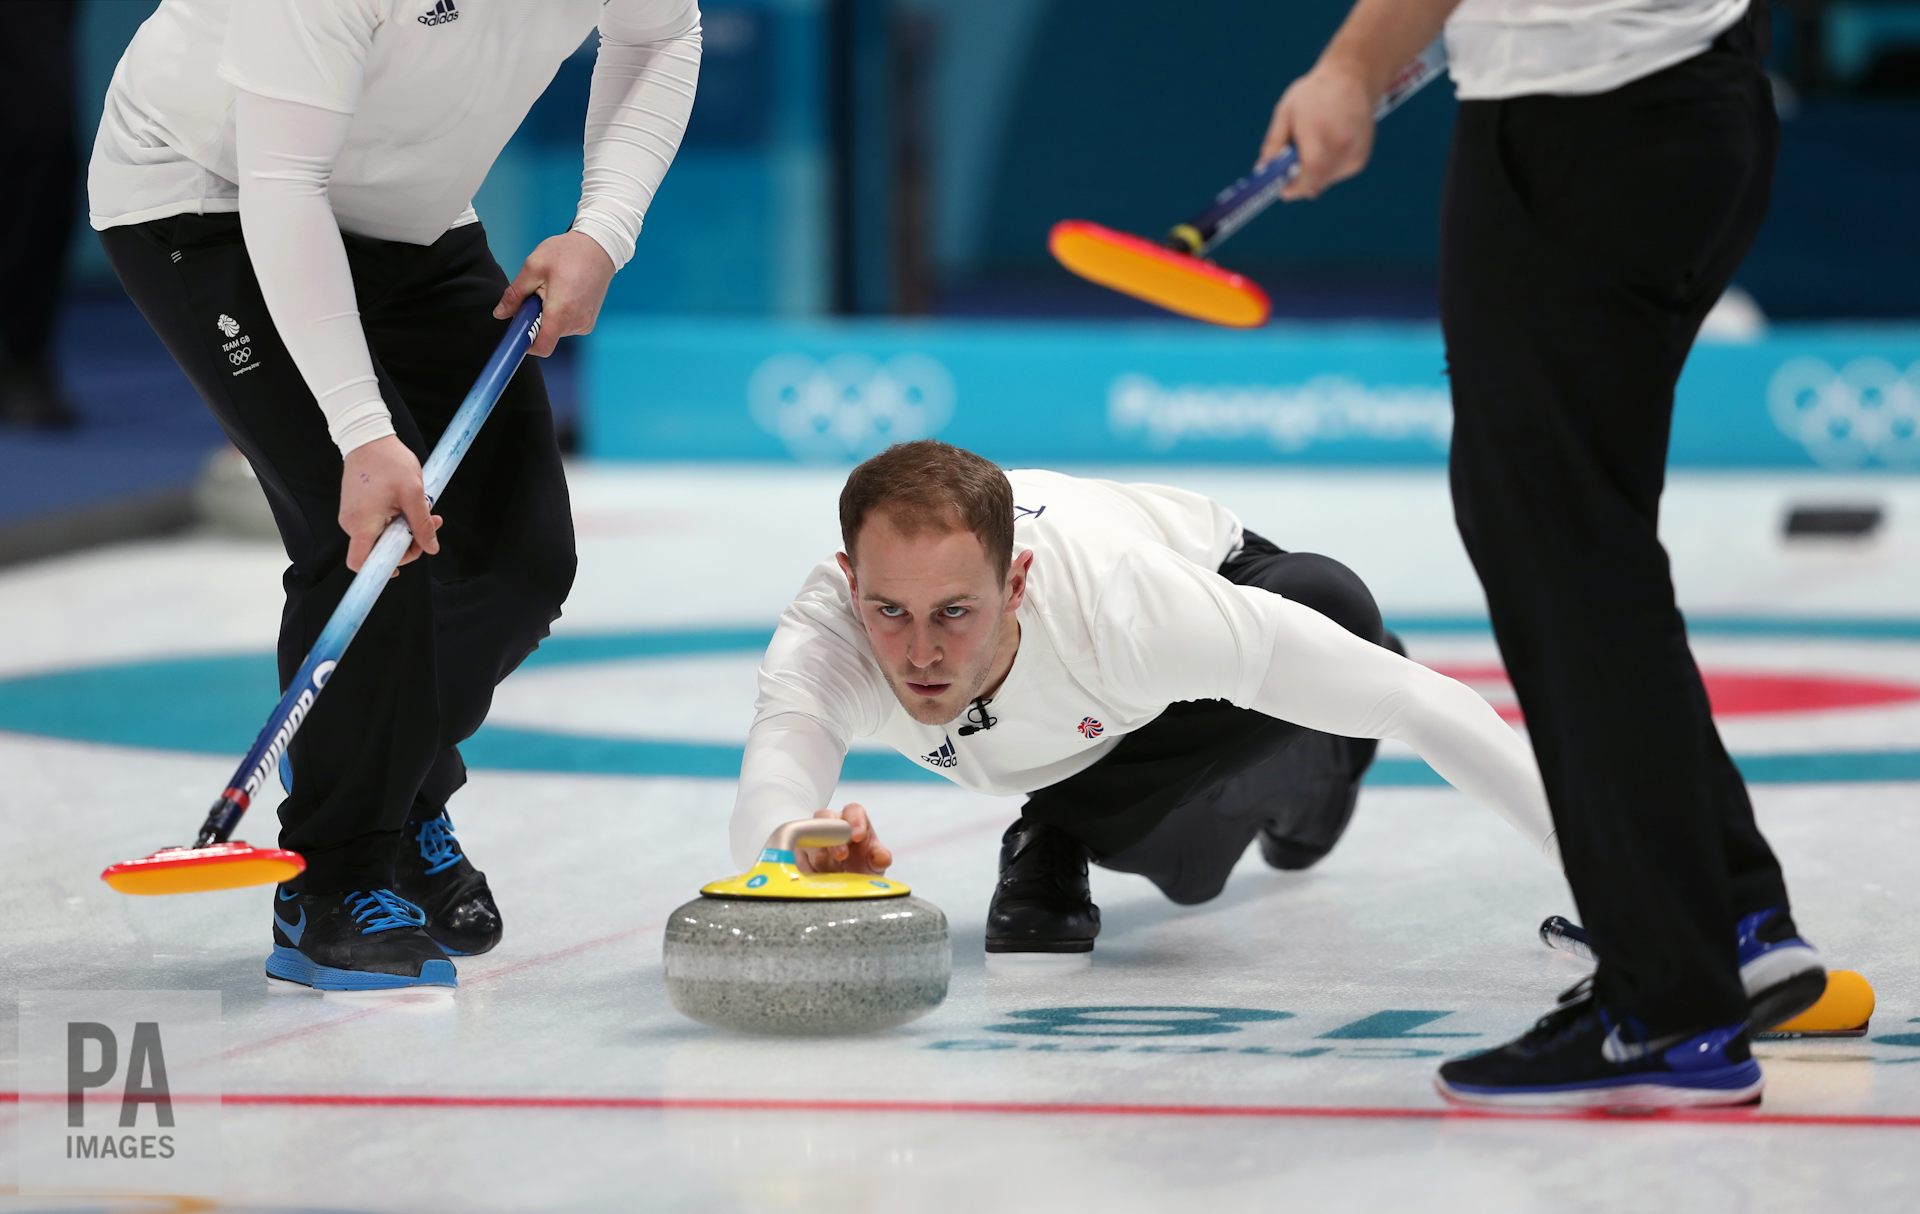 Why curling is so gripping to watch